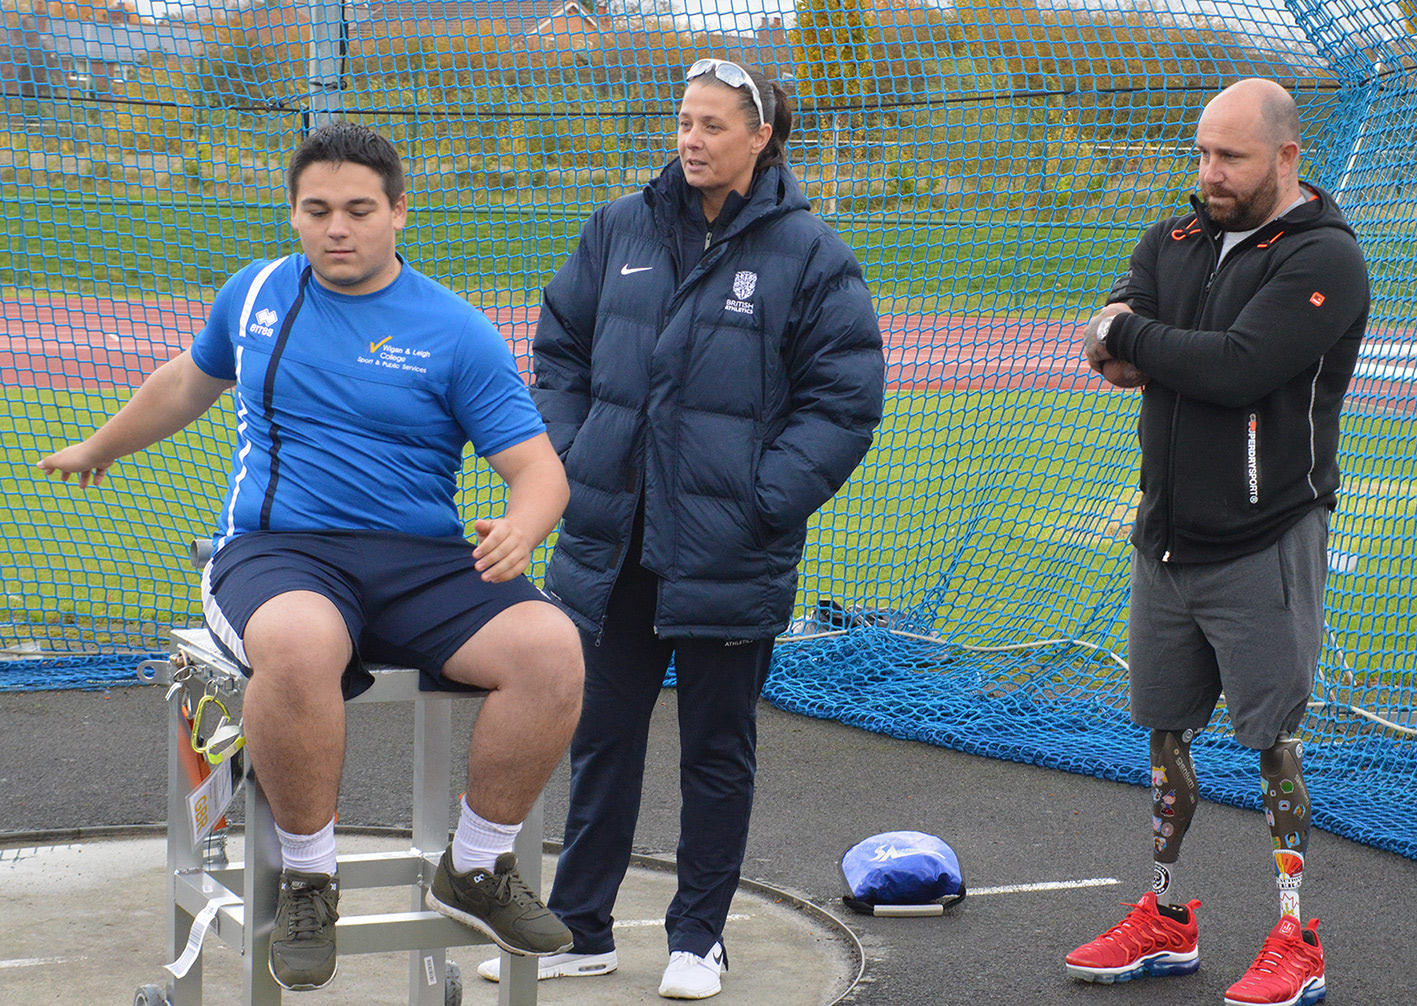 Leigh College sports students learn from Invictus Games star and elite coach